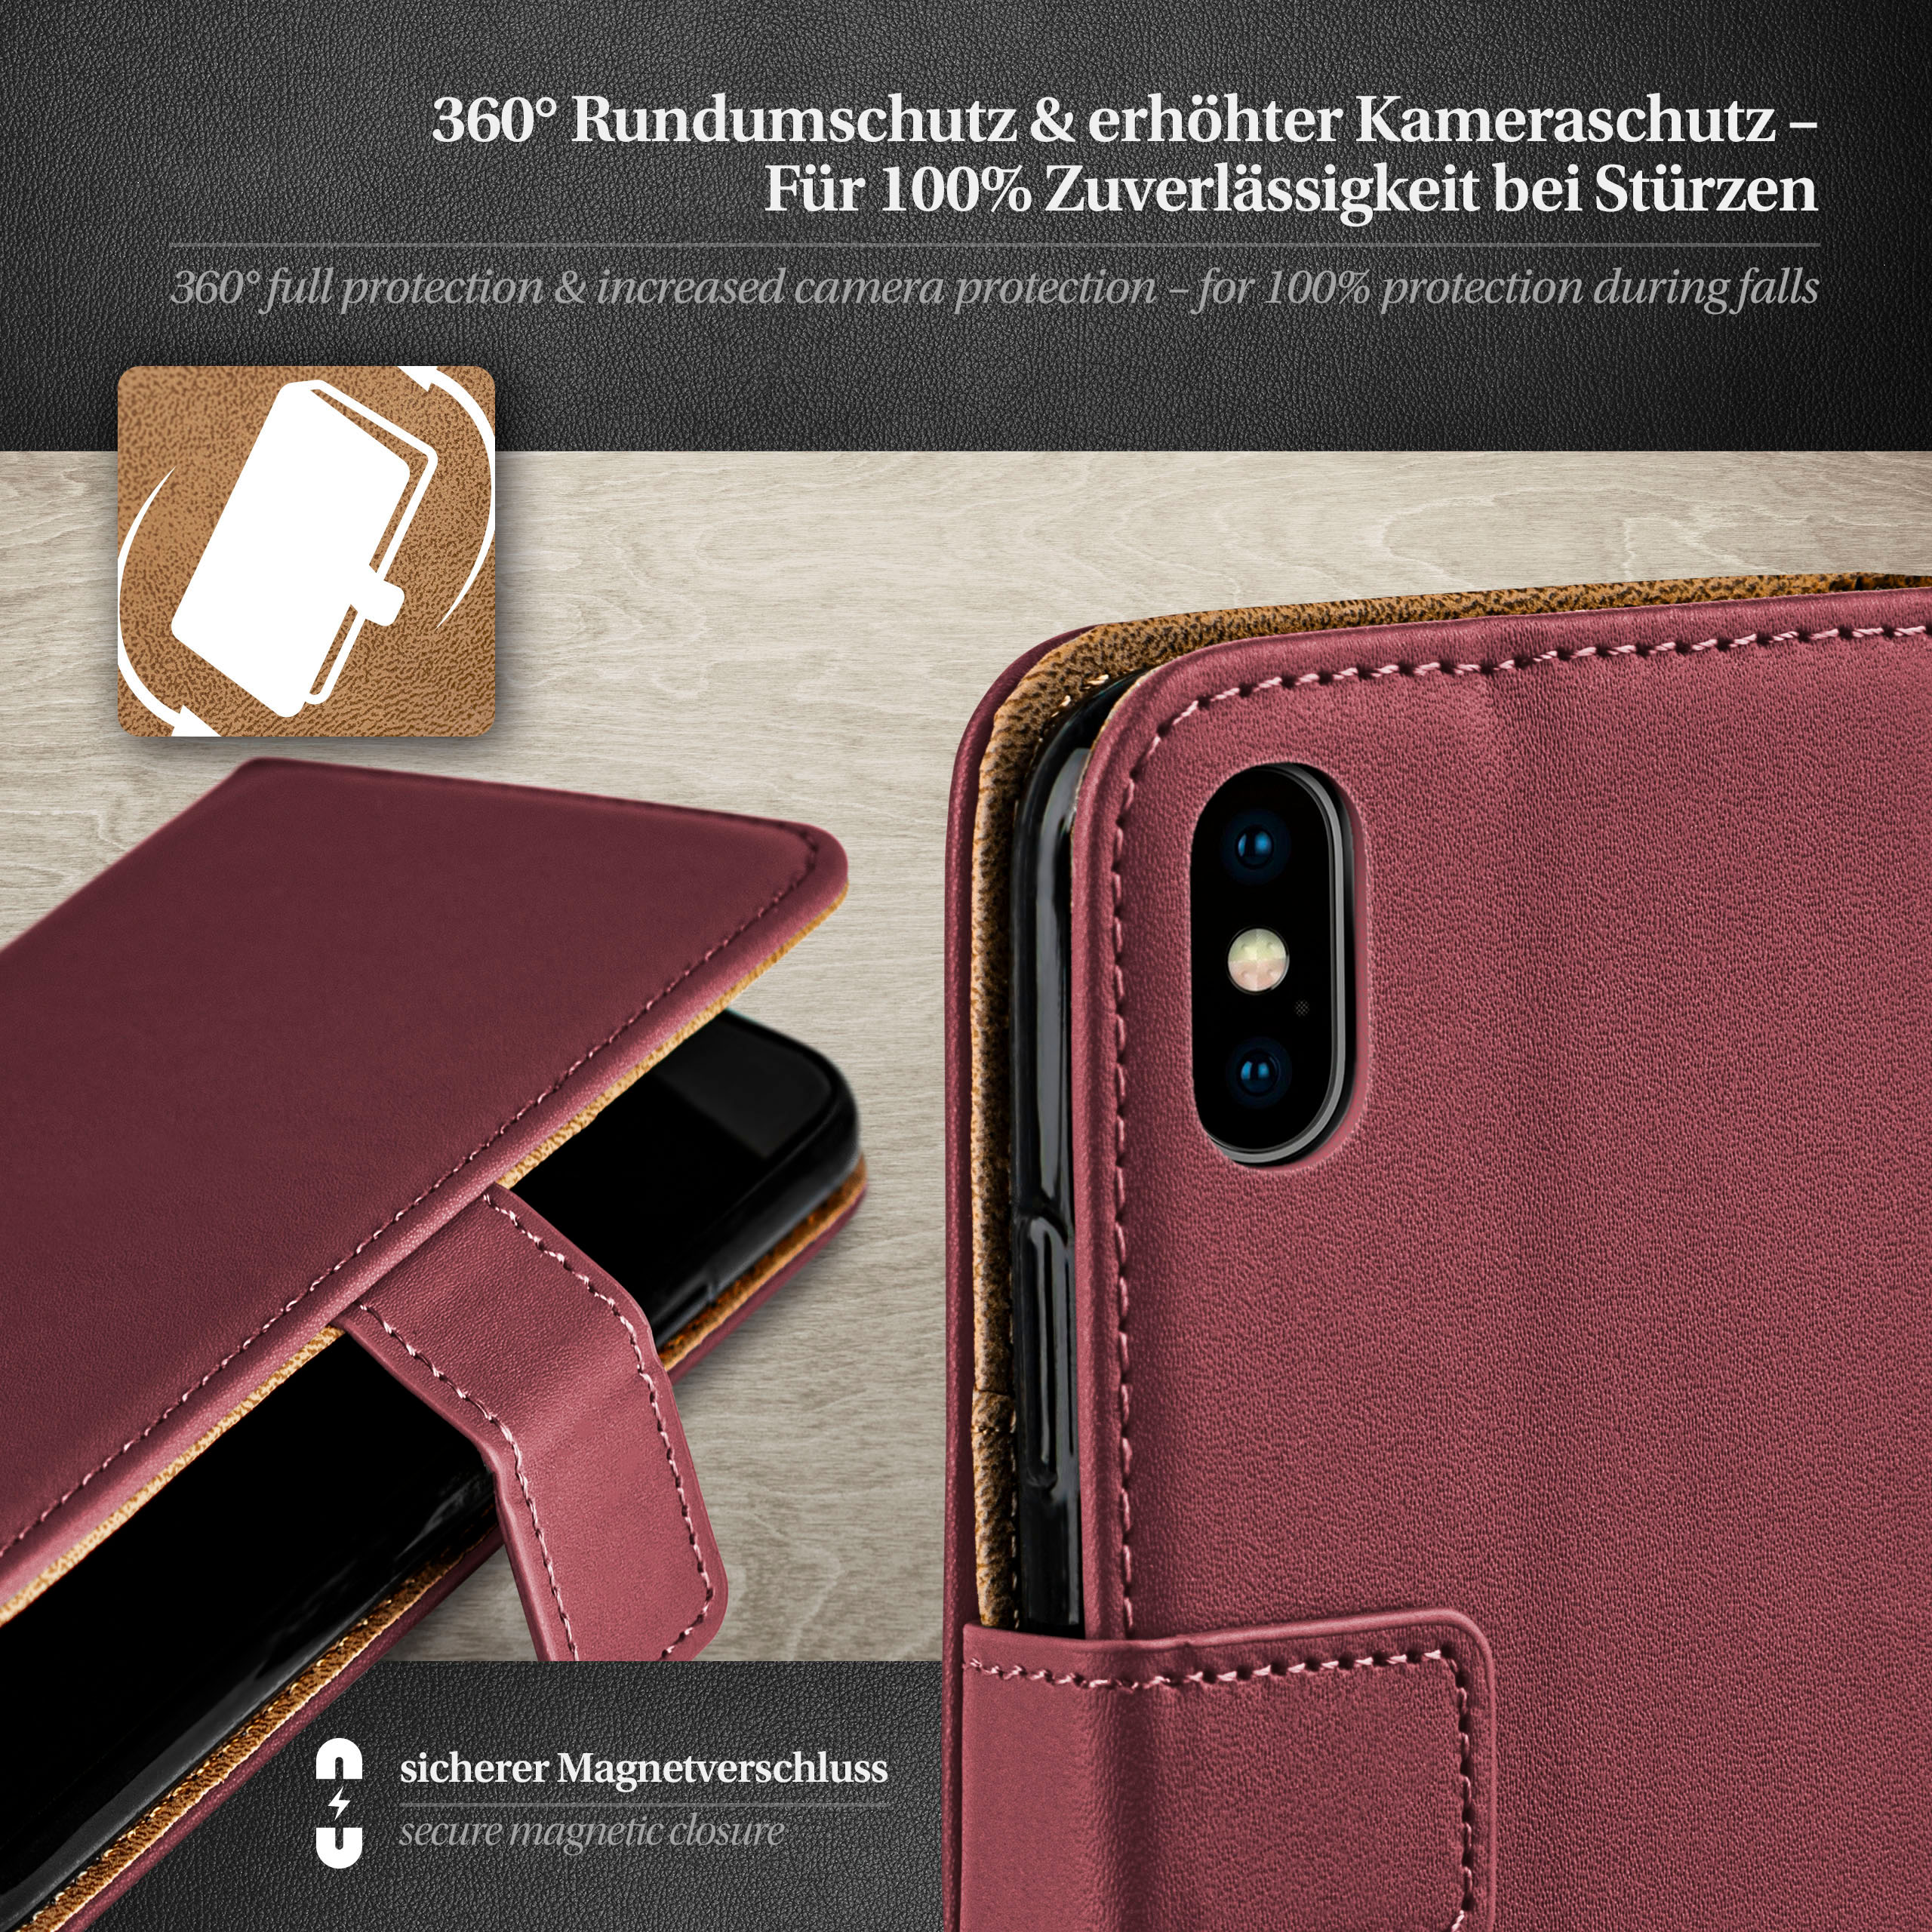 Book iPhone Bookcover, XS, iPhone Maroon-Red MOEX Apple, / X Case,